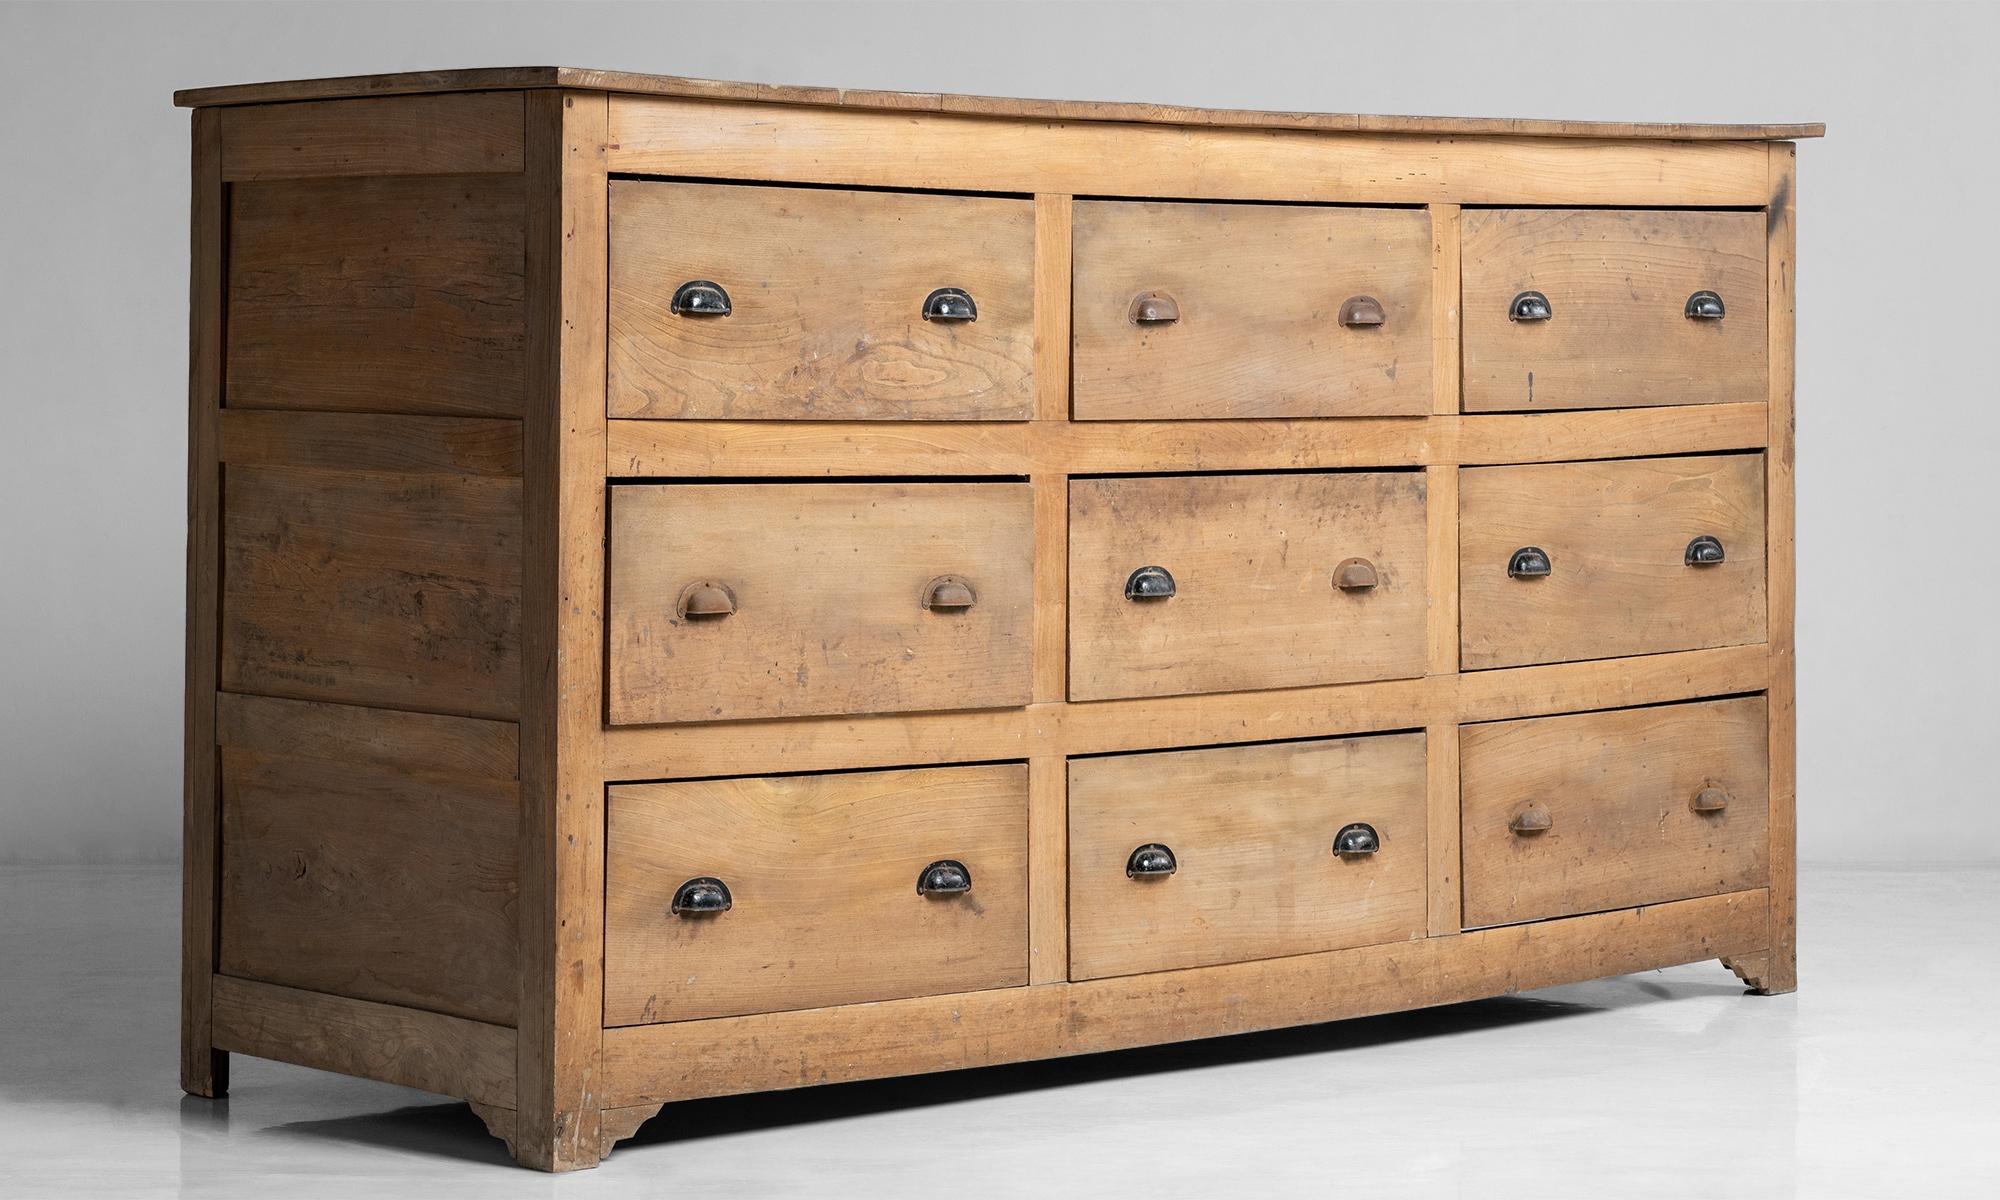 Substantial Series of nine oak fronted drawers with pine lining, and paneled pine sides and back boards.